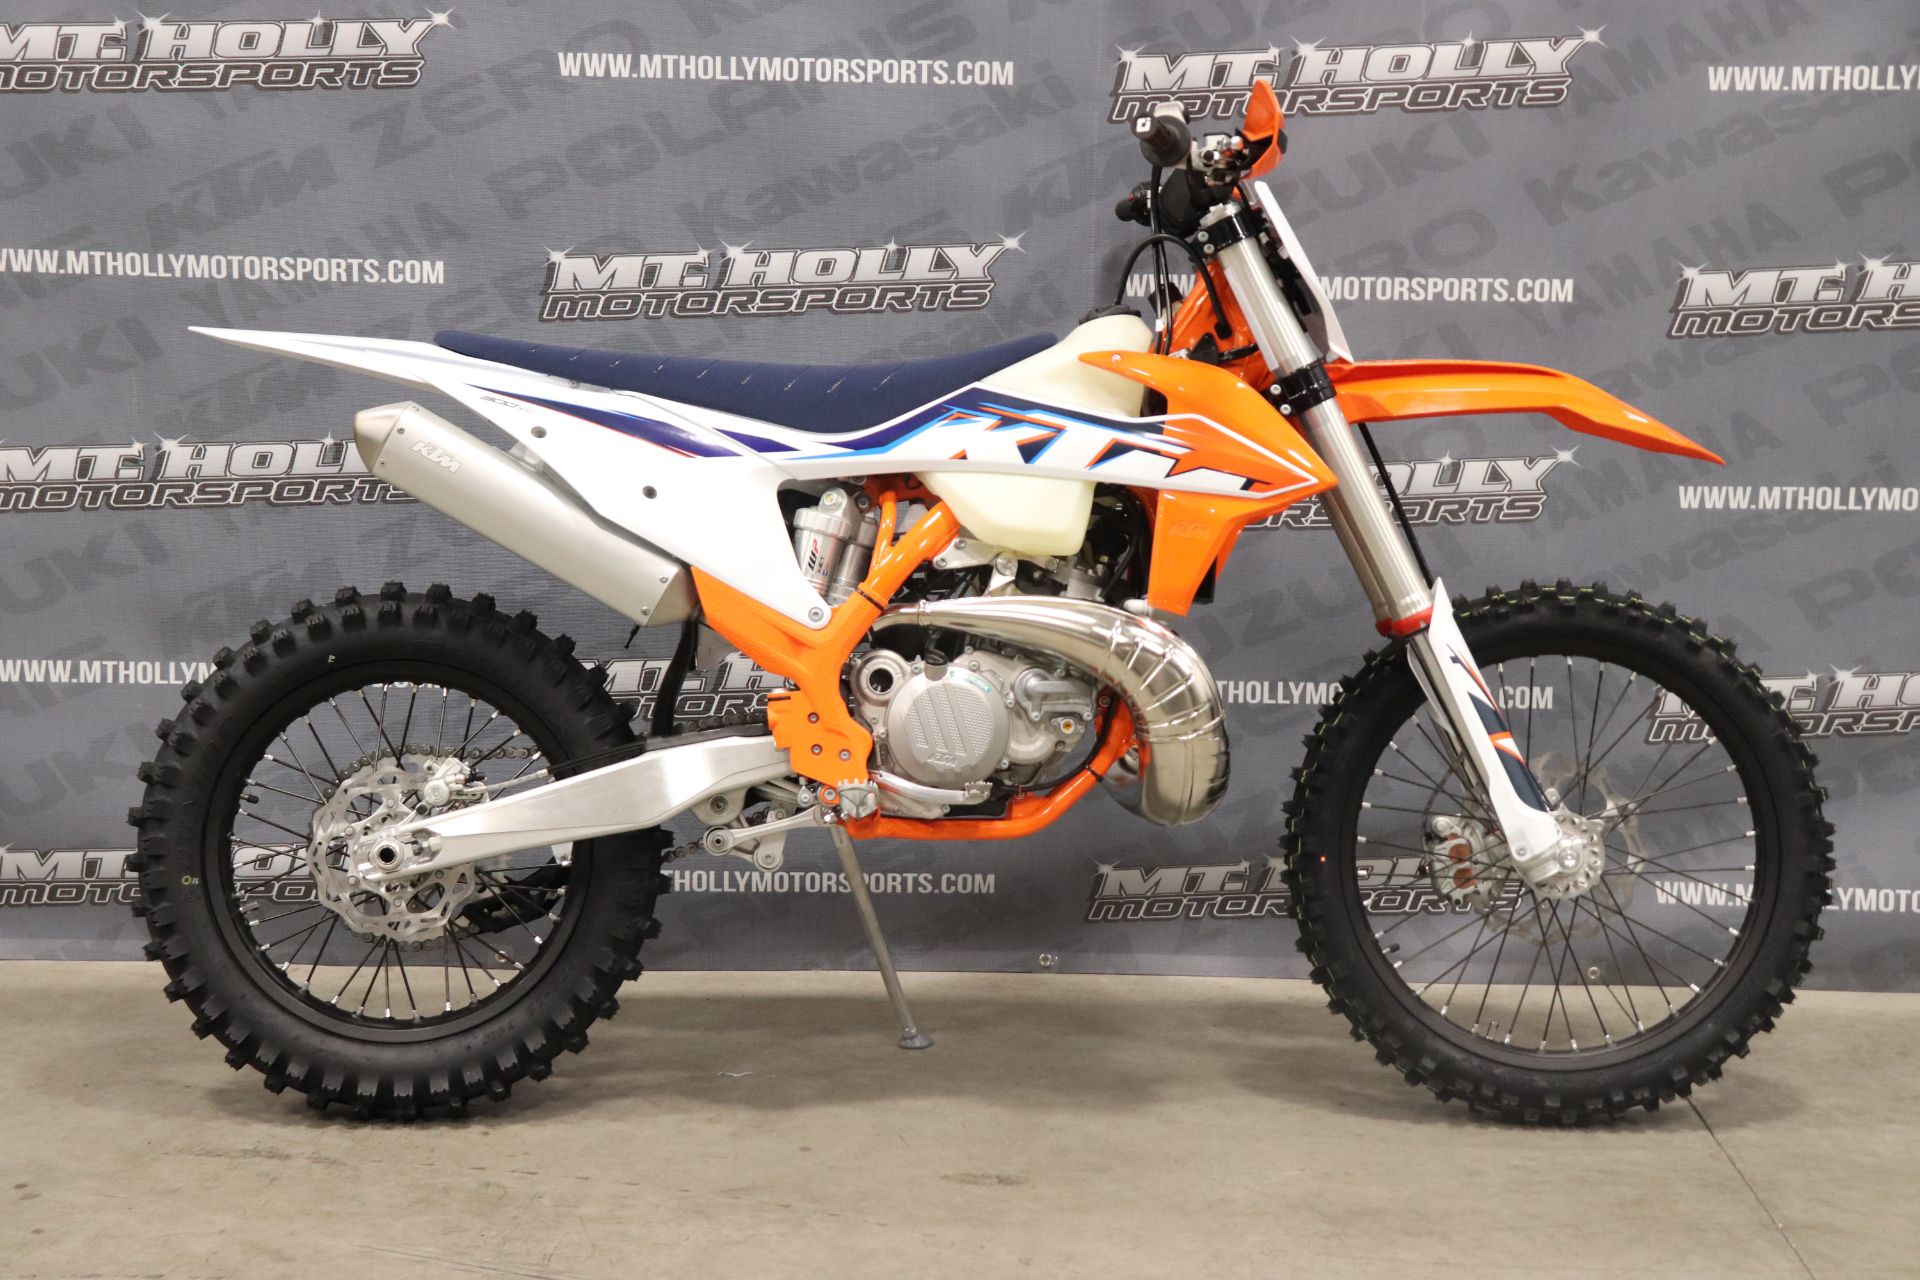 2022 KTM 300 XC TPI in Vincentown, New Jersey - Photo 1